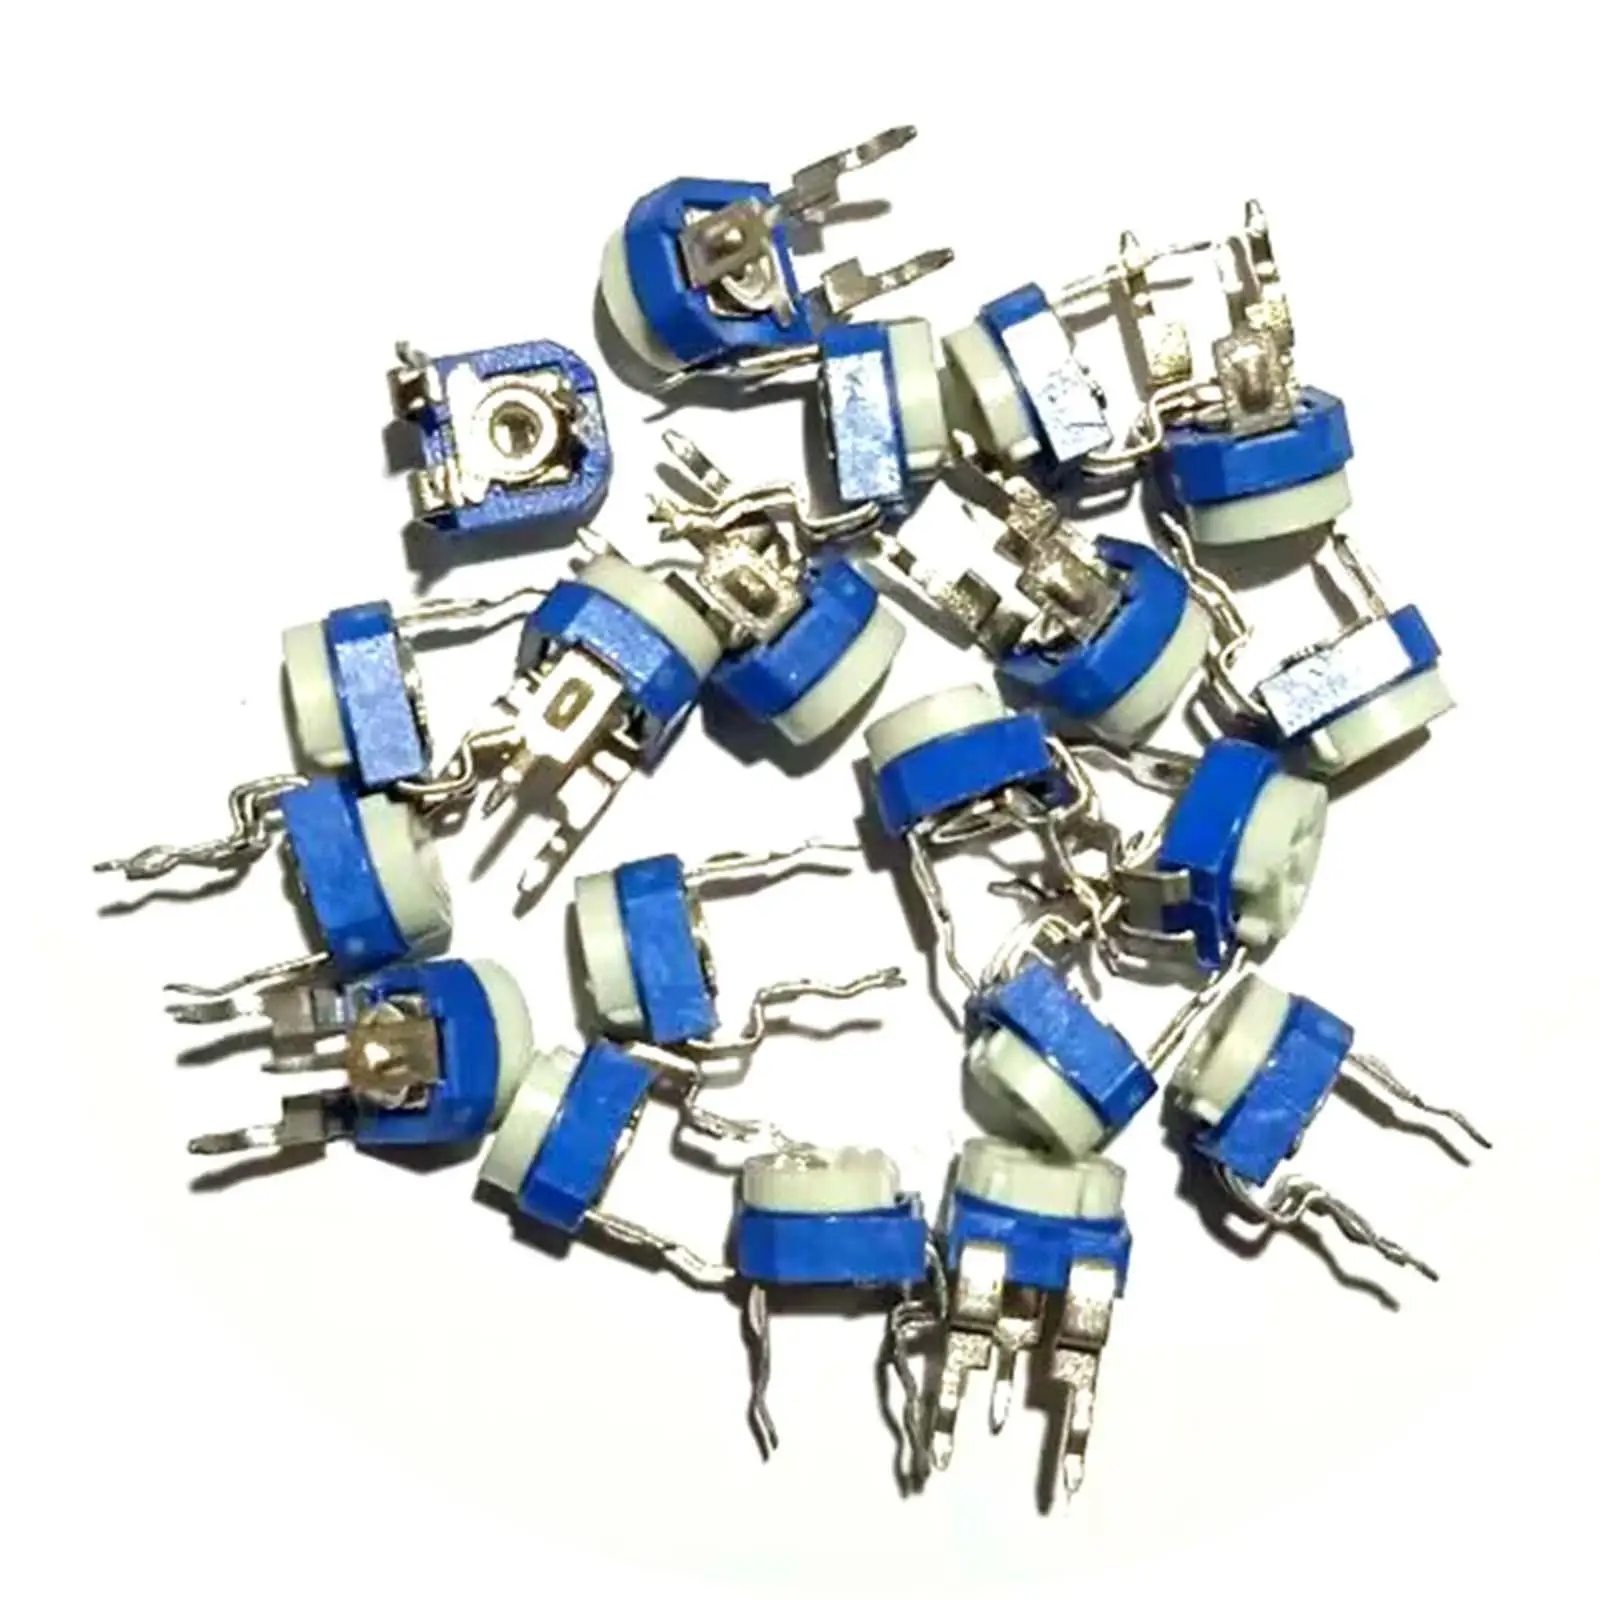 

20 Pieces Potentiometer Variable Resistor for Convenient Installation Direct Replacement Durable Long Service Life Professional